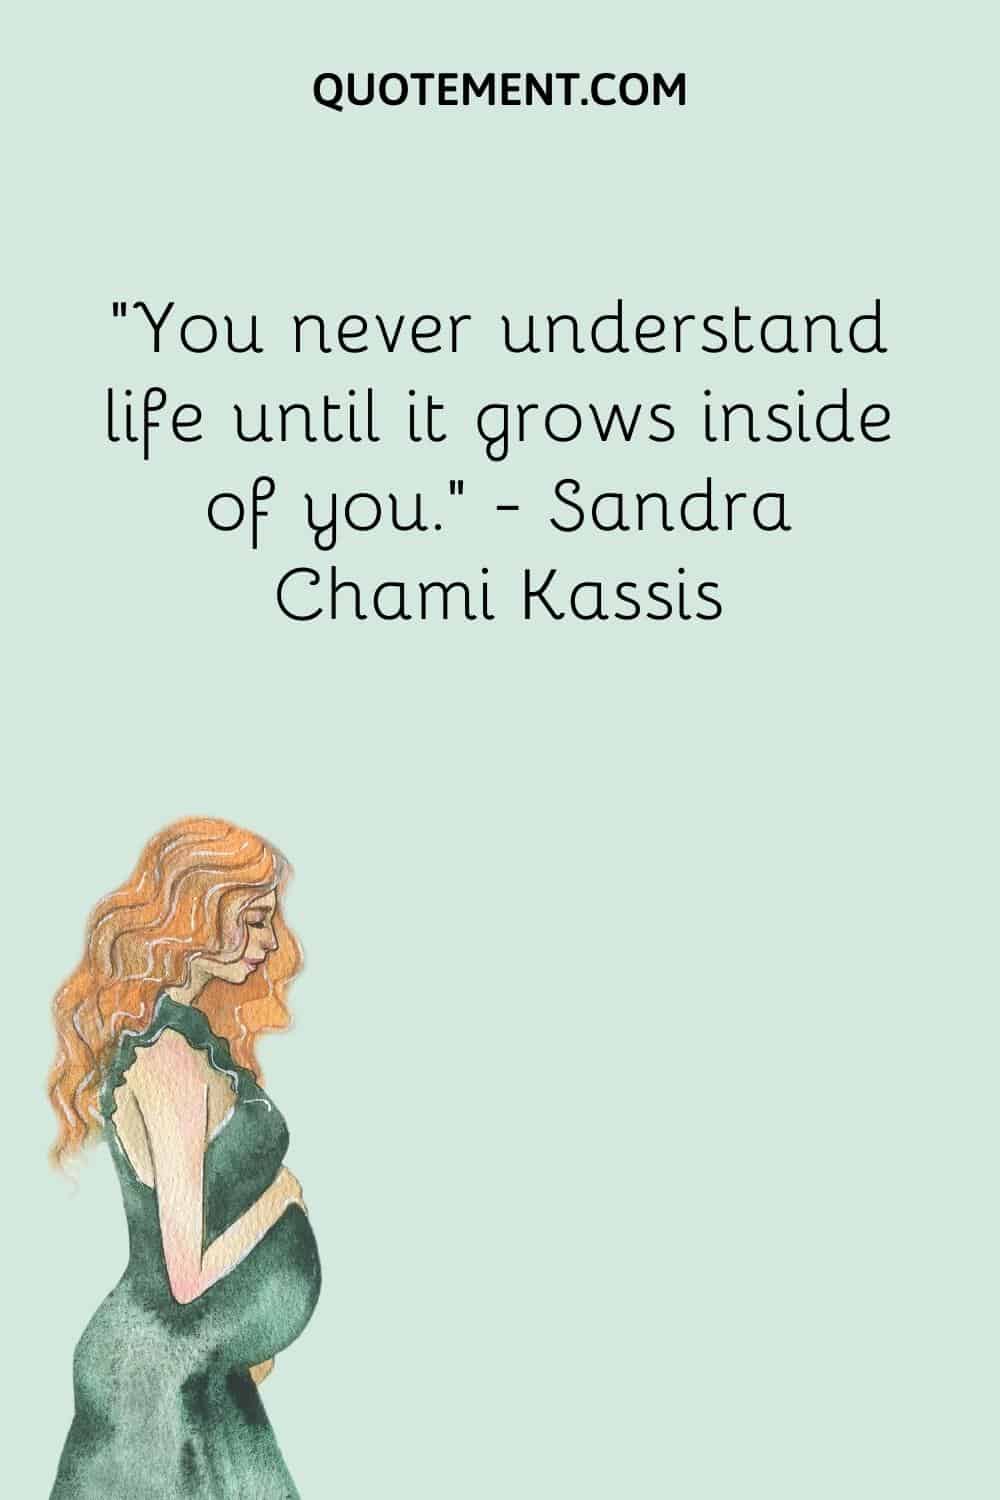 “You never understand life until it grows inside of you.” ― Sandra Chami Kassis